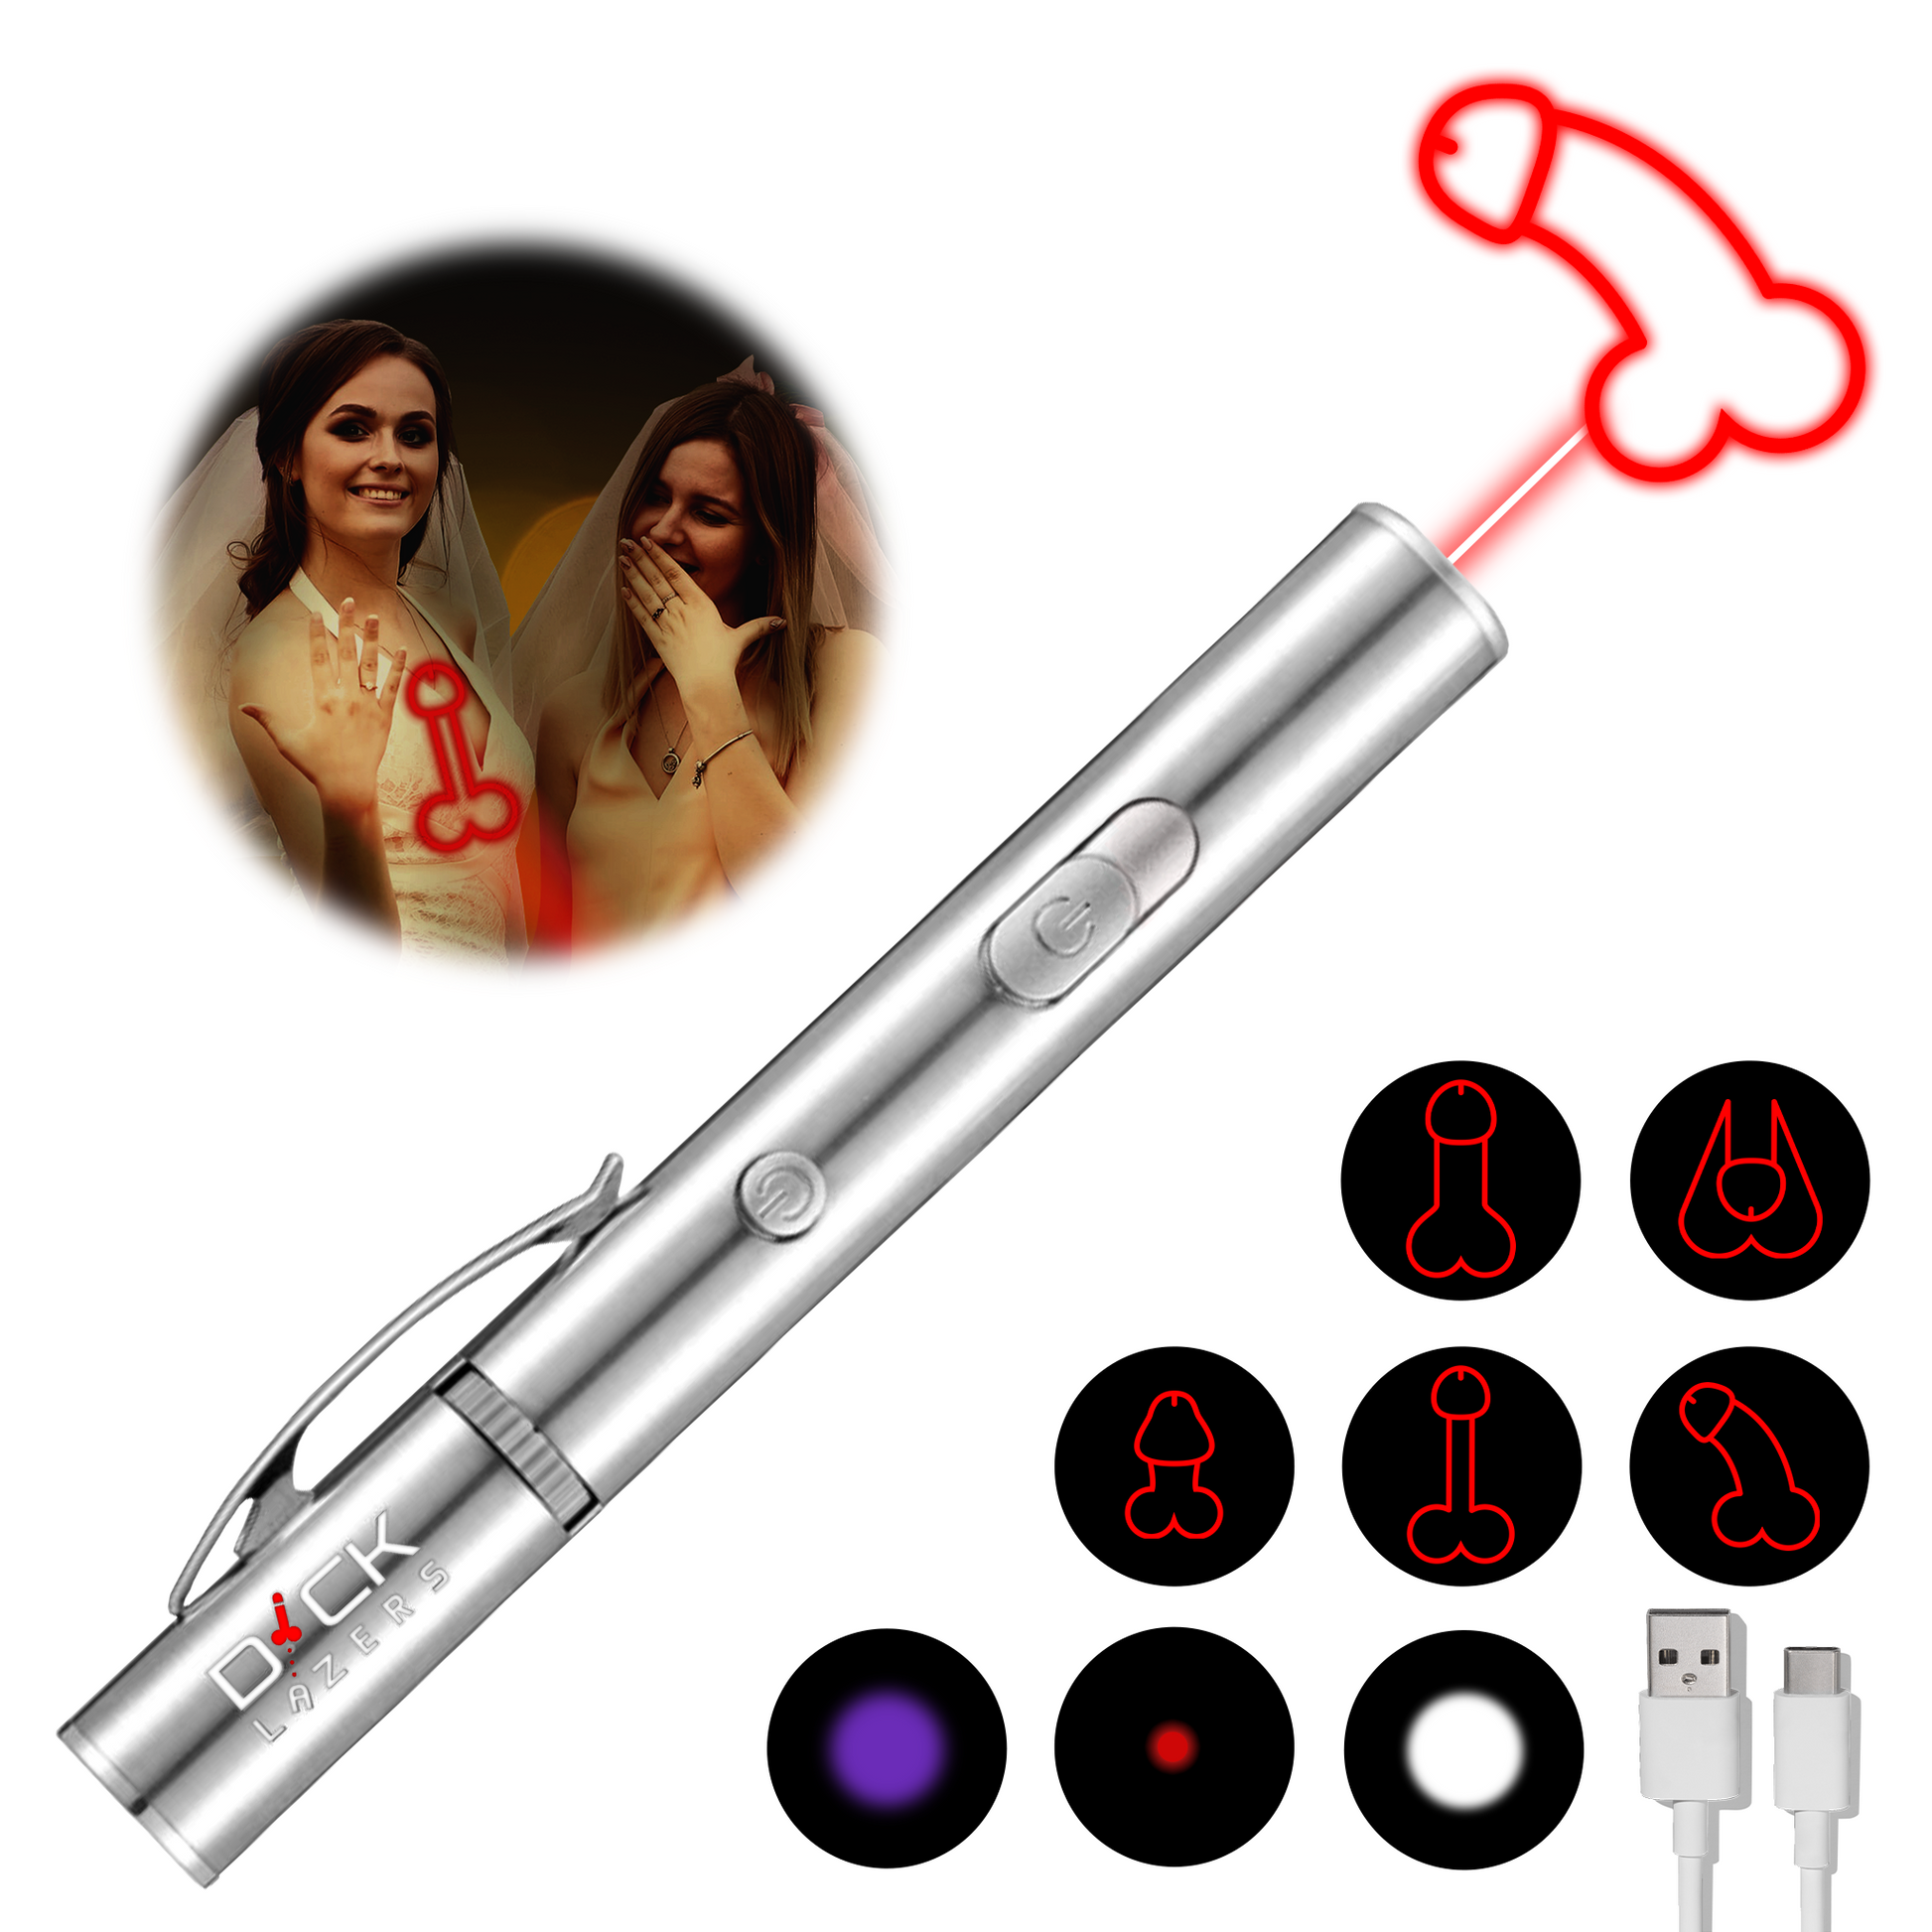 HIGH QUALITY & FUNCTIONAL: The red dot laser is useful for presentations, flashlight feature omits high-powered white light, and blacklight feature is great for inspecting money, ID's and more. It's made from lightweight stainless steel and comes with a USB charger. 1.4 oz, 5 in.  Image of bachelorette party, the dick lazer flashlight / laser shooting a dick.